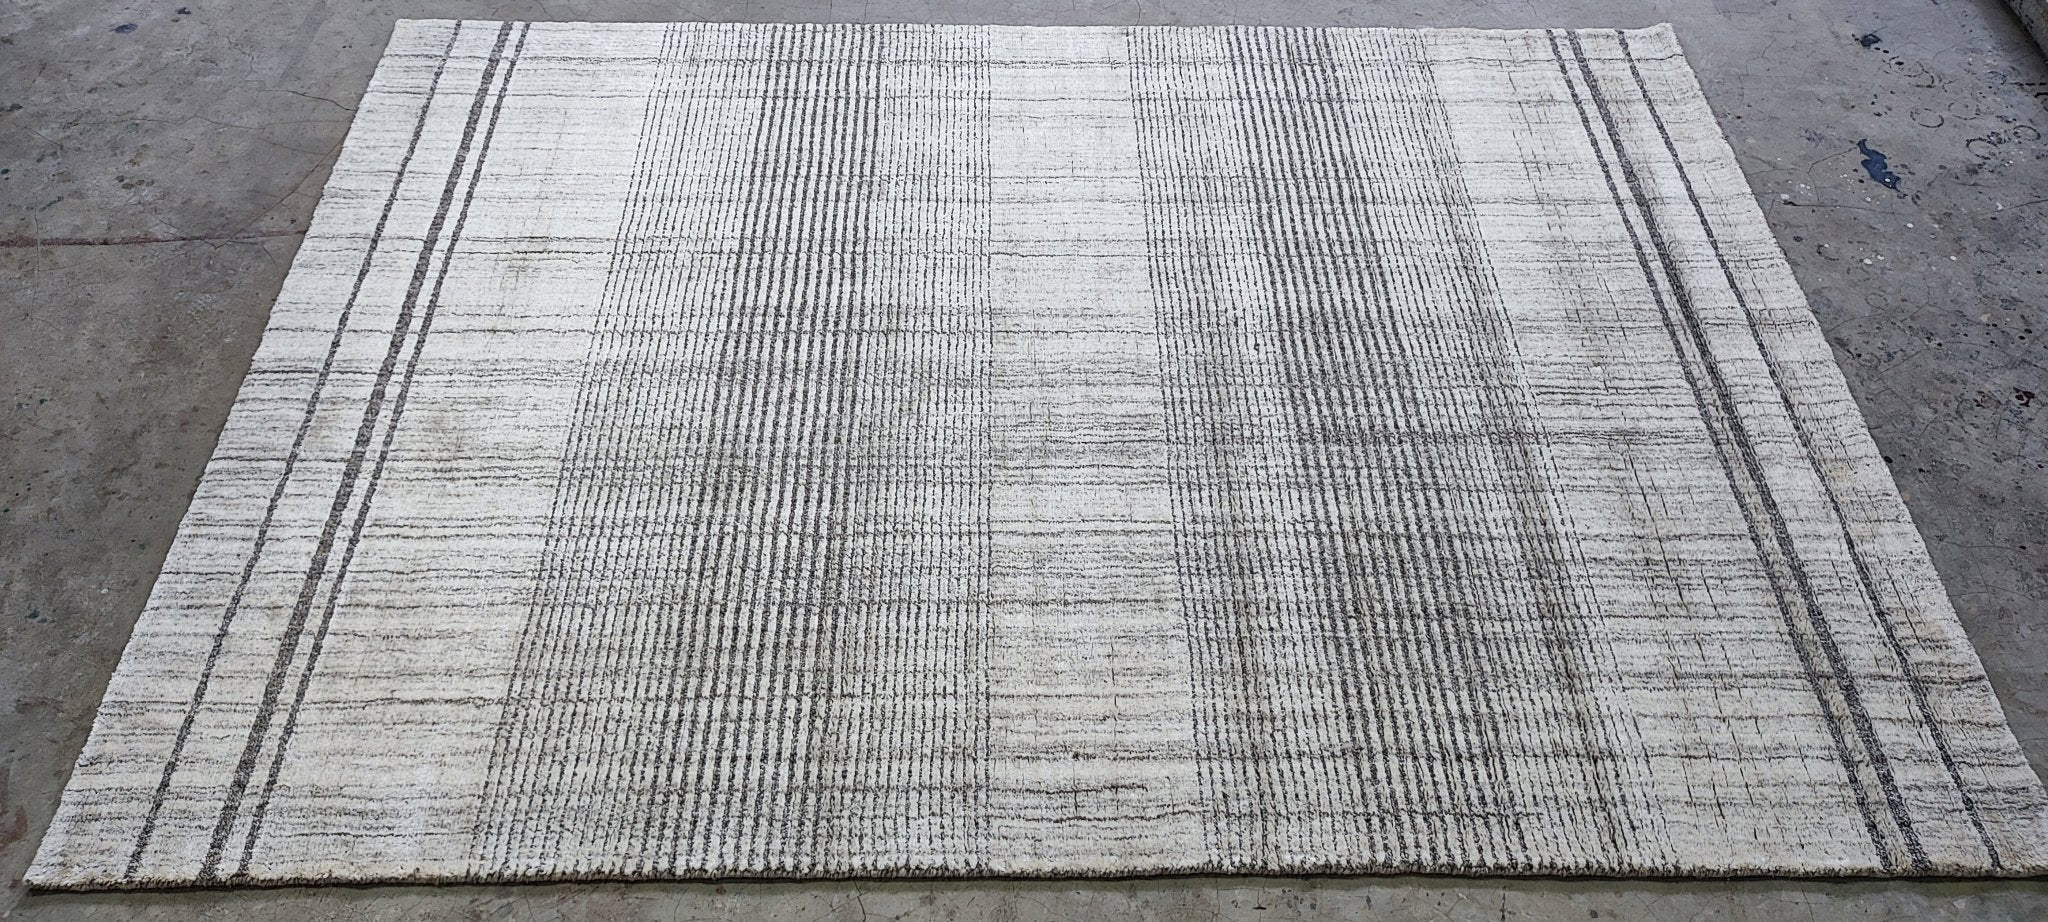 Youssef 4.6x6.6 Handwoven Blended Cut Pile Carpet | Banana Manor Rug Factory Outlet